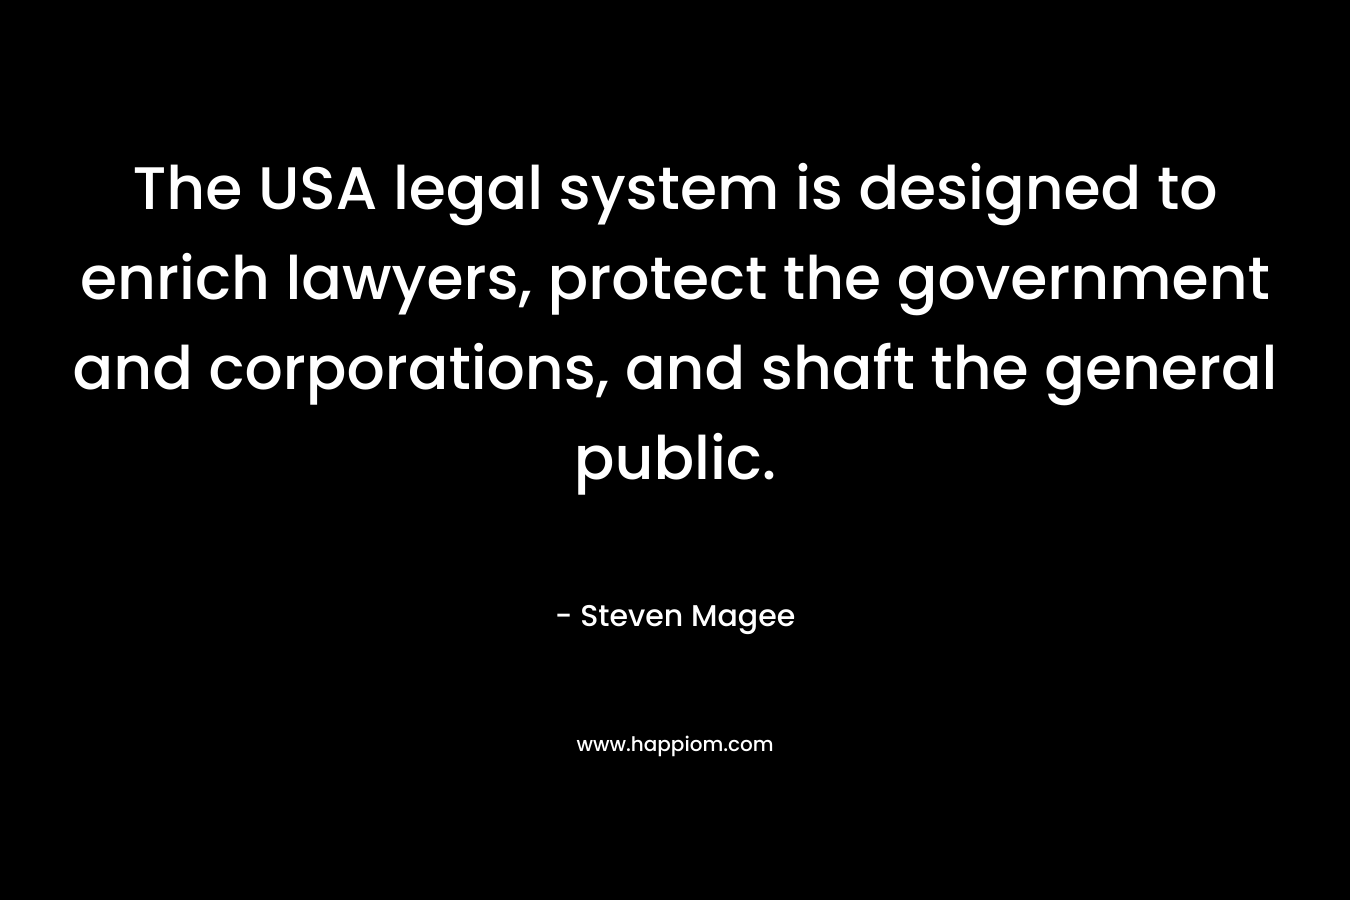 The USA legal system is designed to enrich lawyers, protect the government and corporations, and shaft the general public. – Steven Magee